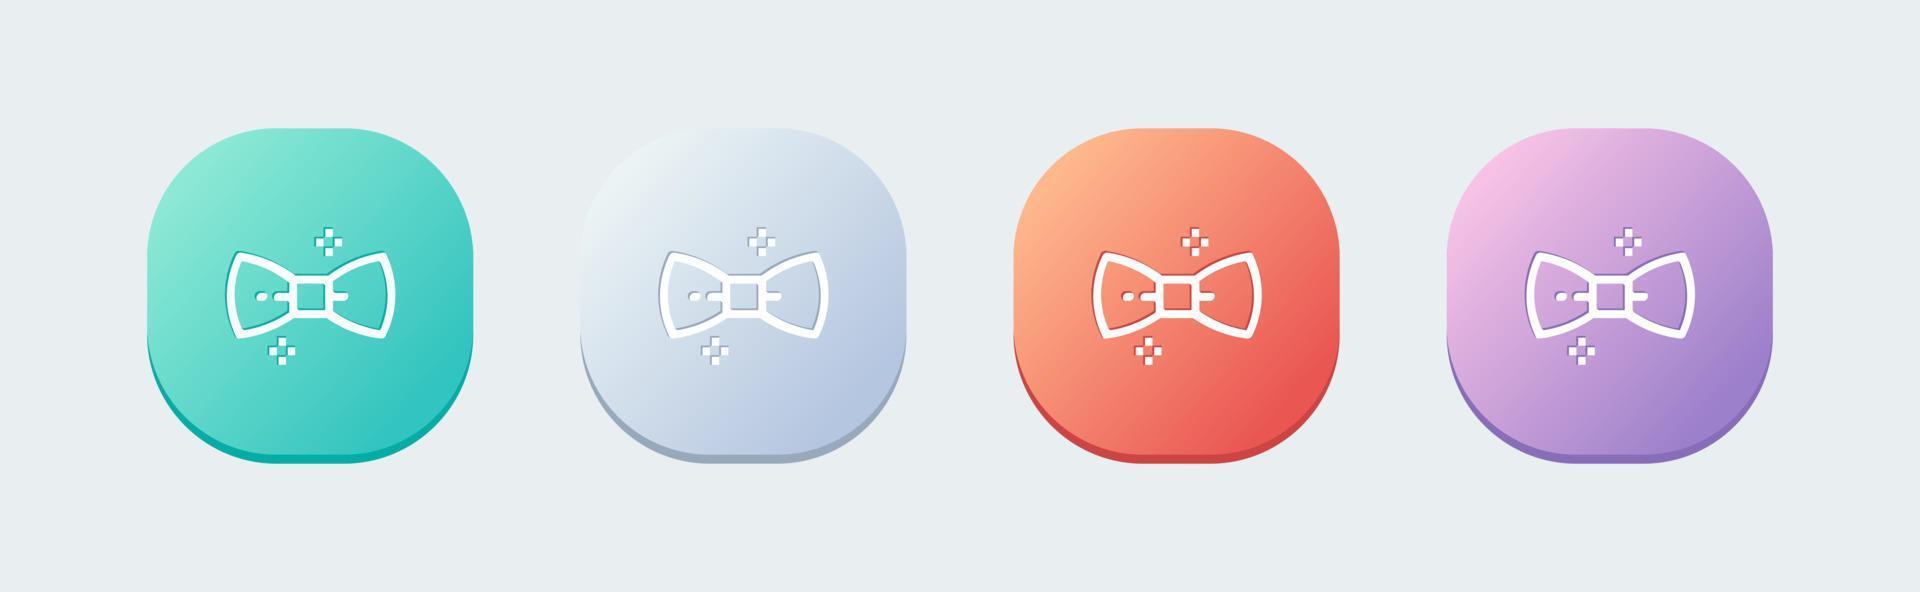 Bowties line icon in flat design style. Bow tie signs vector illustration.